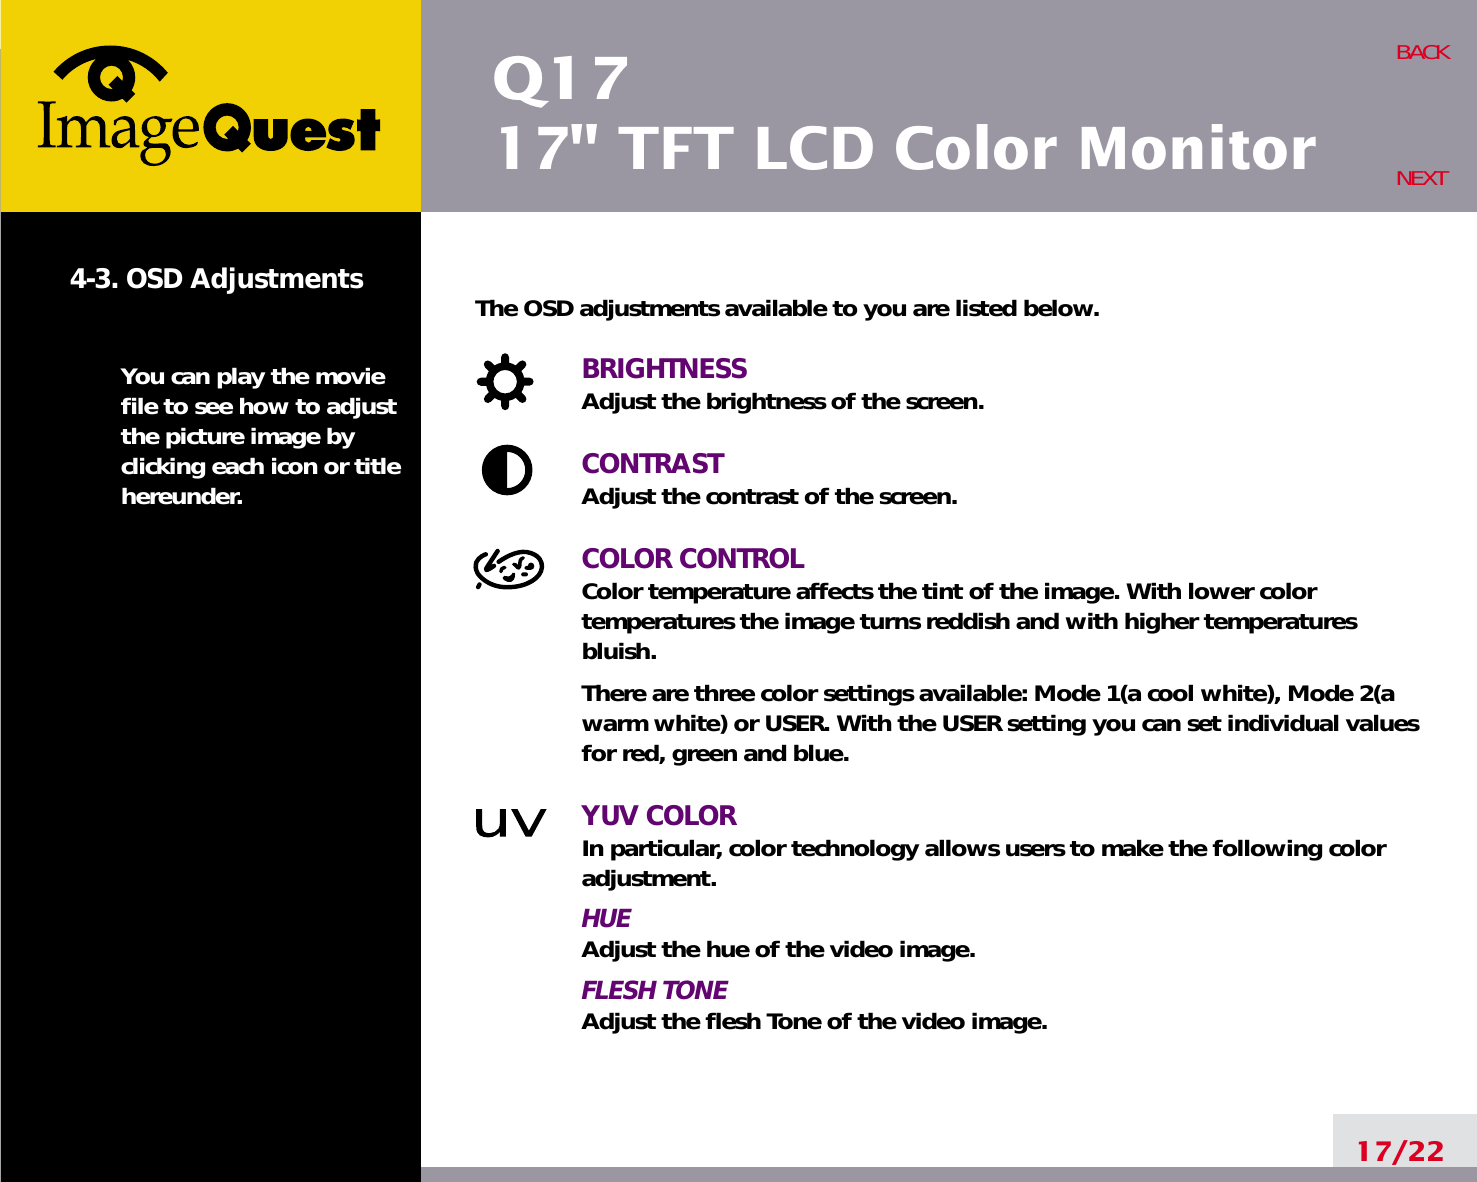 Q1717&quot; TFT LCD Color Monitor17/22BACKNEXT4-3. OSD AdjustmentsYou can play the moviefile to see how to adjustthe picture image byclicking each icon or titlehereunder.The OSD adjustments available to you are listed below.BRIGHTNESSAdjust the brightness of the screen.CONTRASTAdjust the contrast of the screen.COLOR CONTROLColor temperature affects the tint of the image. With lower color temperatures the image turns reddish and with higher temperatures bluish.There are three color settings available: Mode 1(a cool white), Mode 2(awarm white) or USER. With the USER setting you can set individual valuesfor red, green and blue.YUV COLORIn particular, color technology allows users to make the following coloradjustment.HUEAdjust the hue of the video image.FLESH TONEAdjust the flesh Tone of the video image.